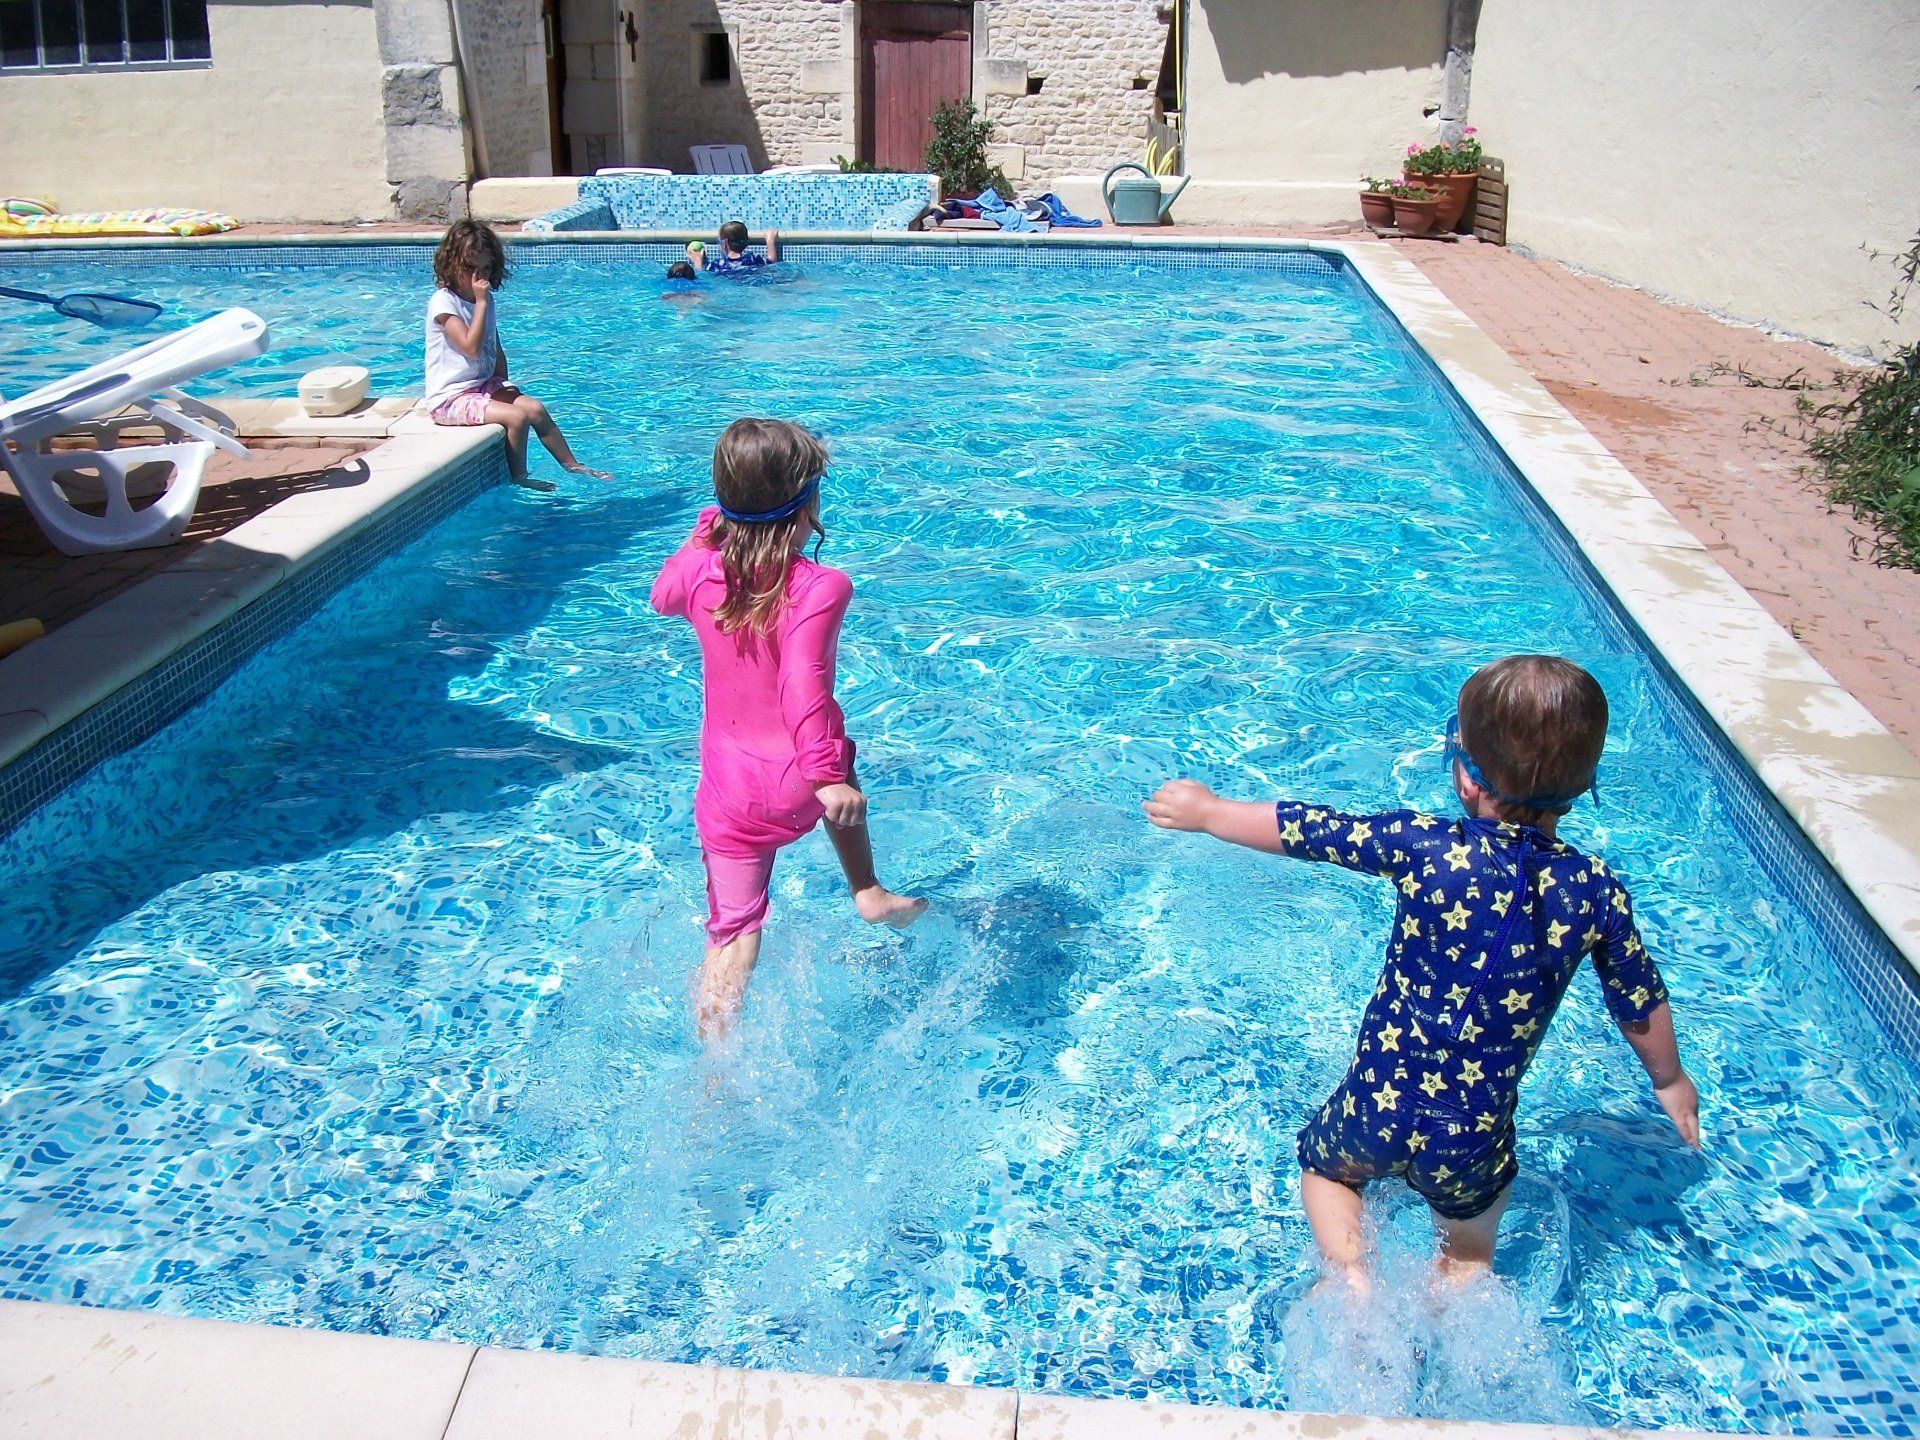 children running into a shallow swimming pool